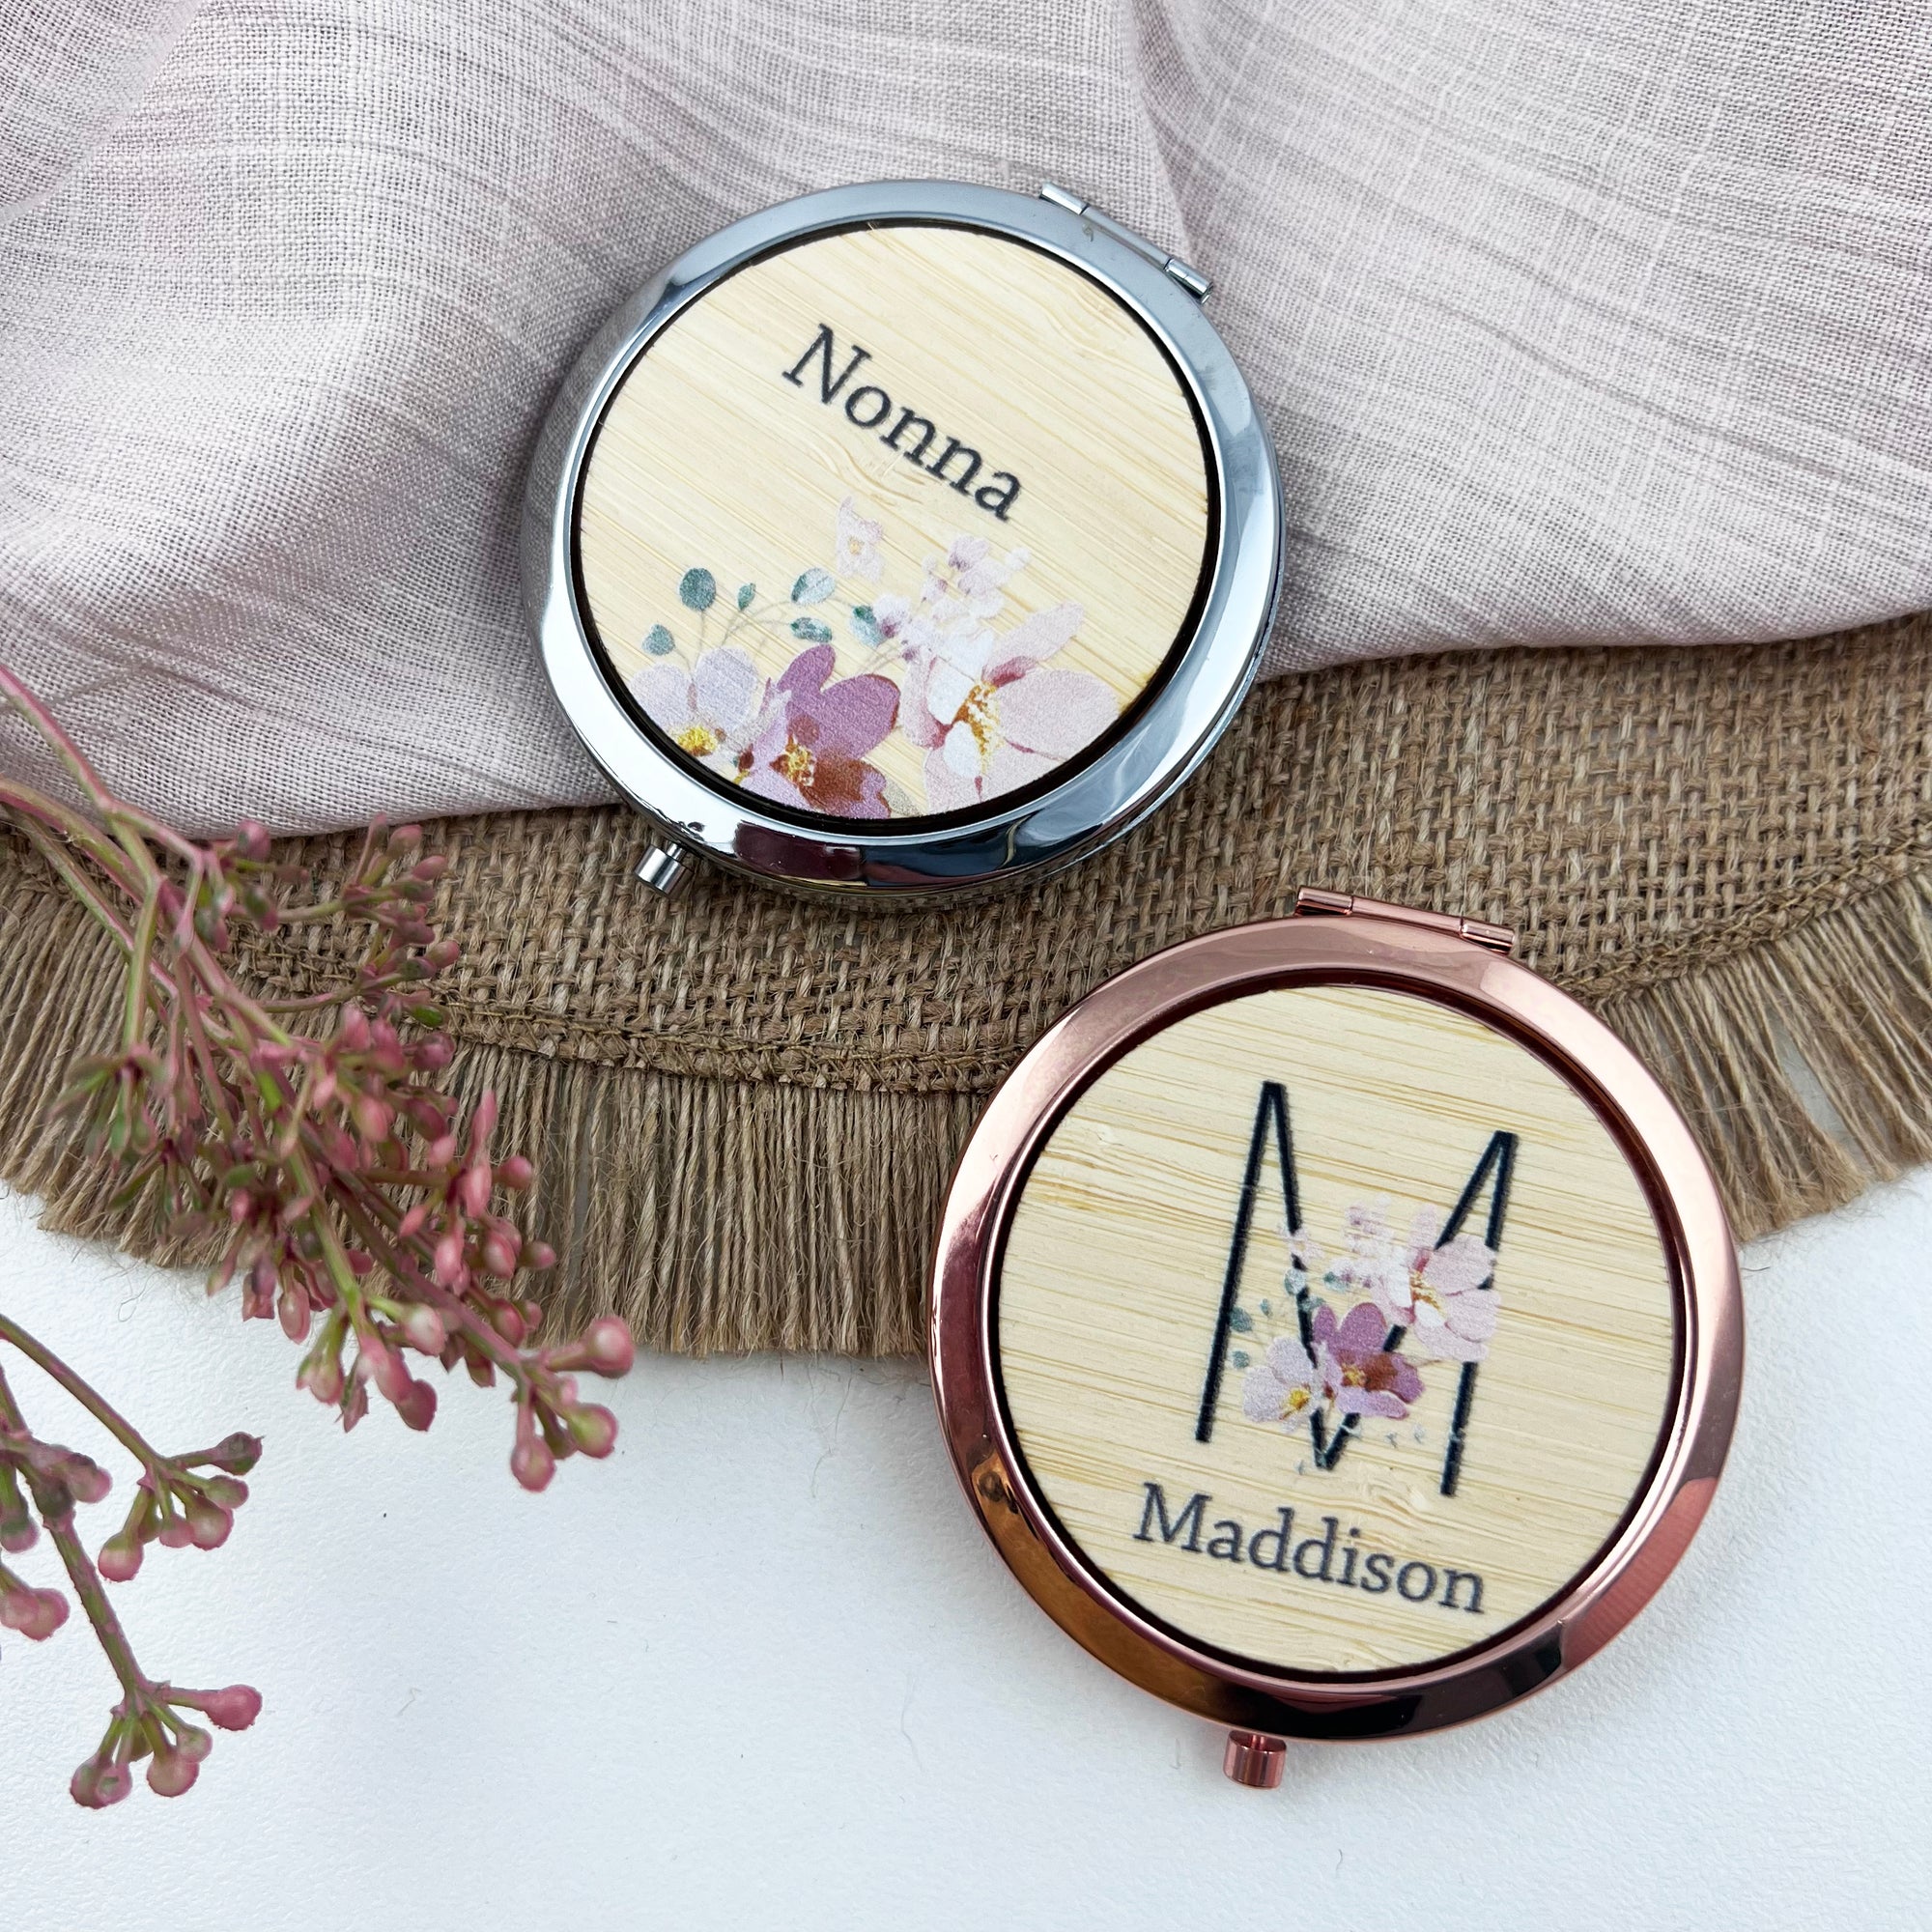 Personalised Bamboo Floral Compact Mirror (Rose Gold & Silver)